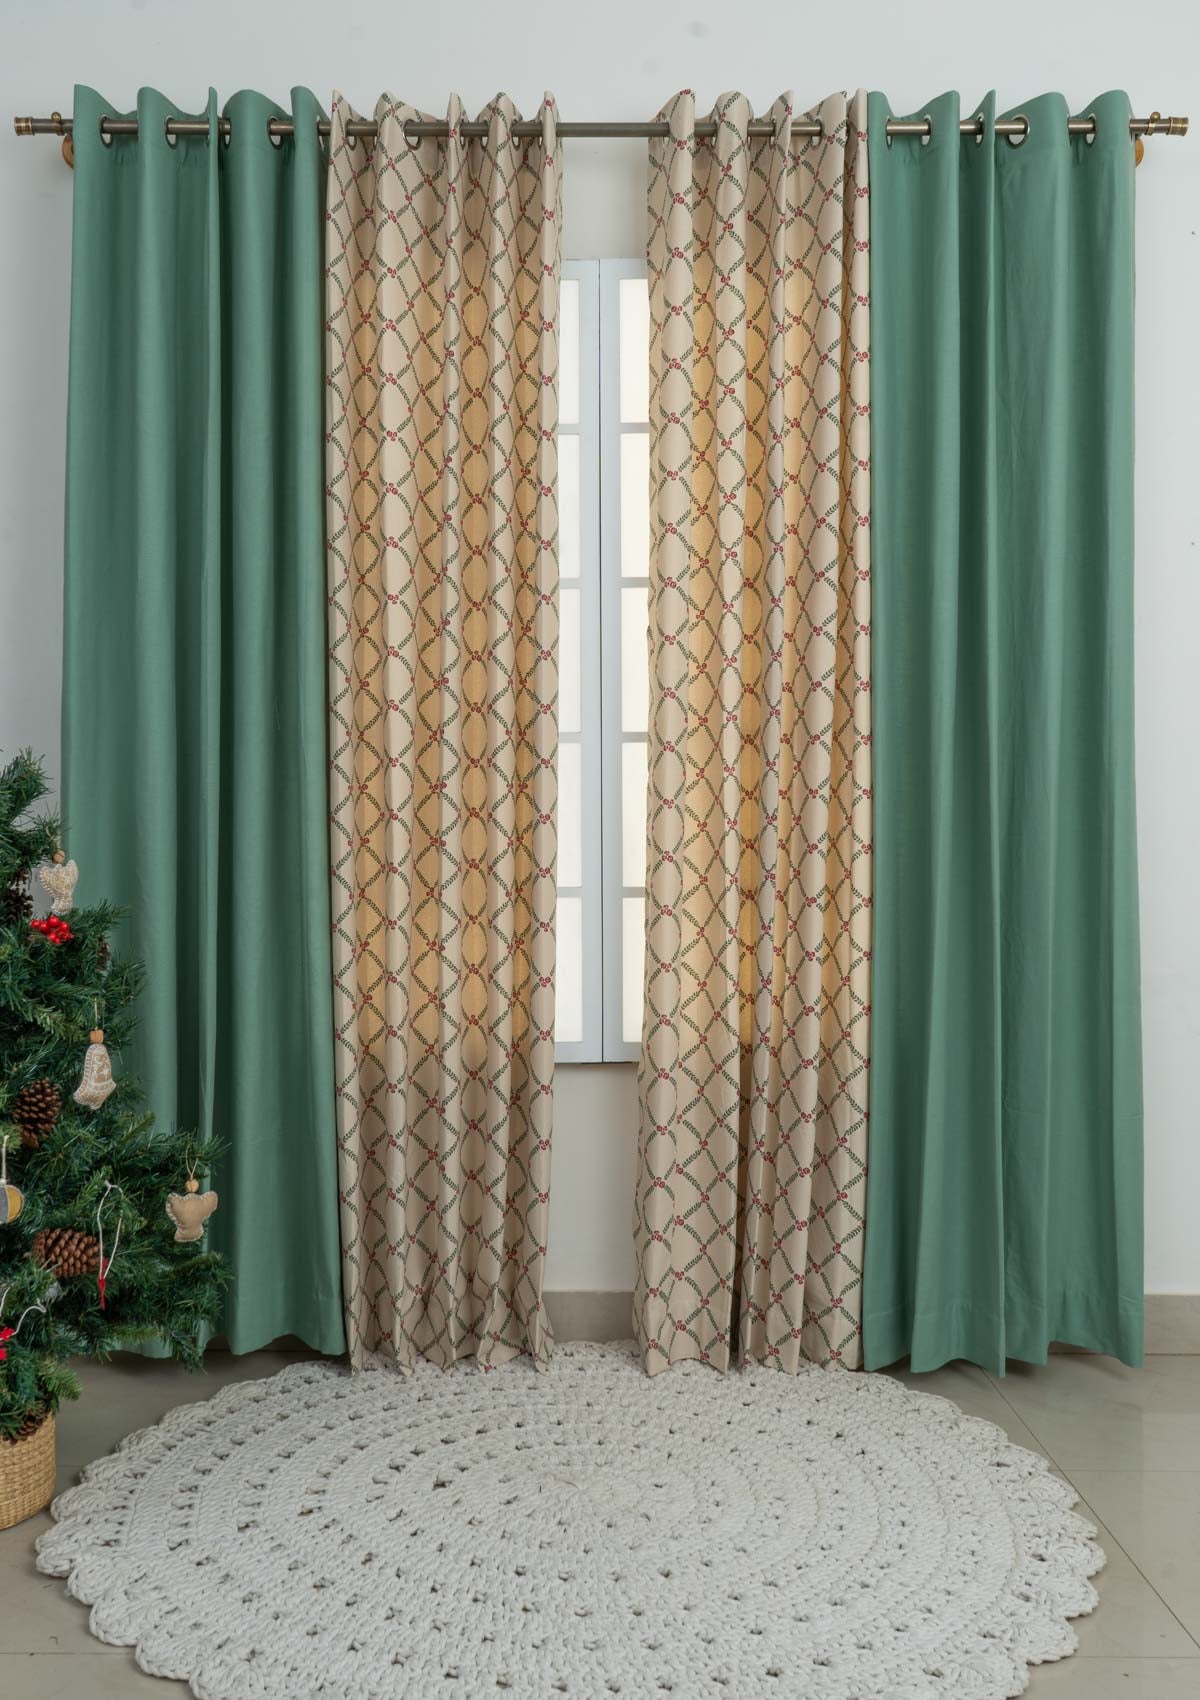 Sage Green with Climbing Roses set of 4 Cotton Curtain - Multicolor